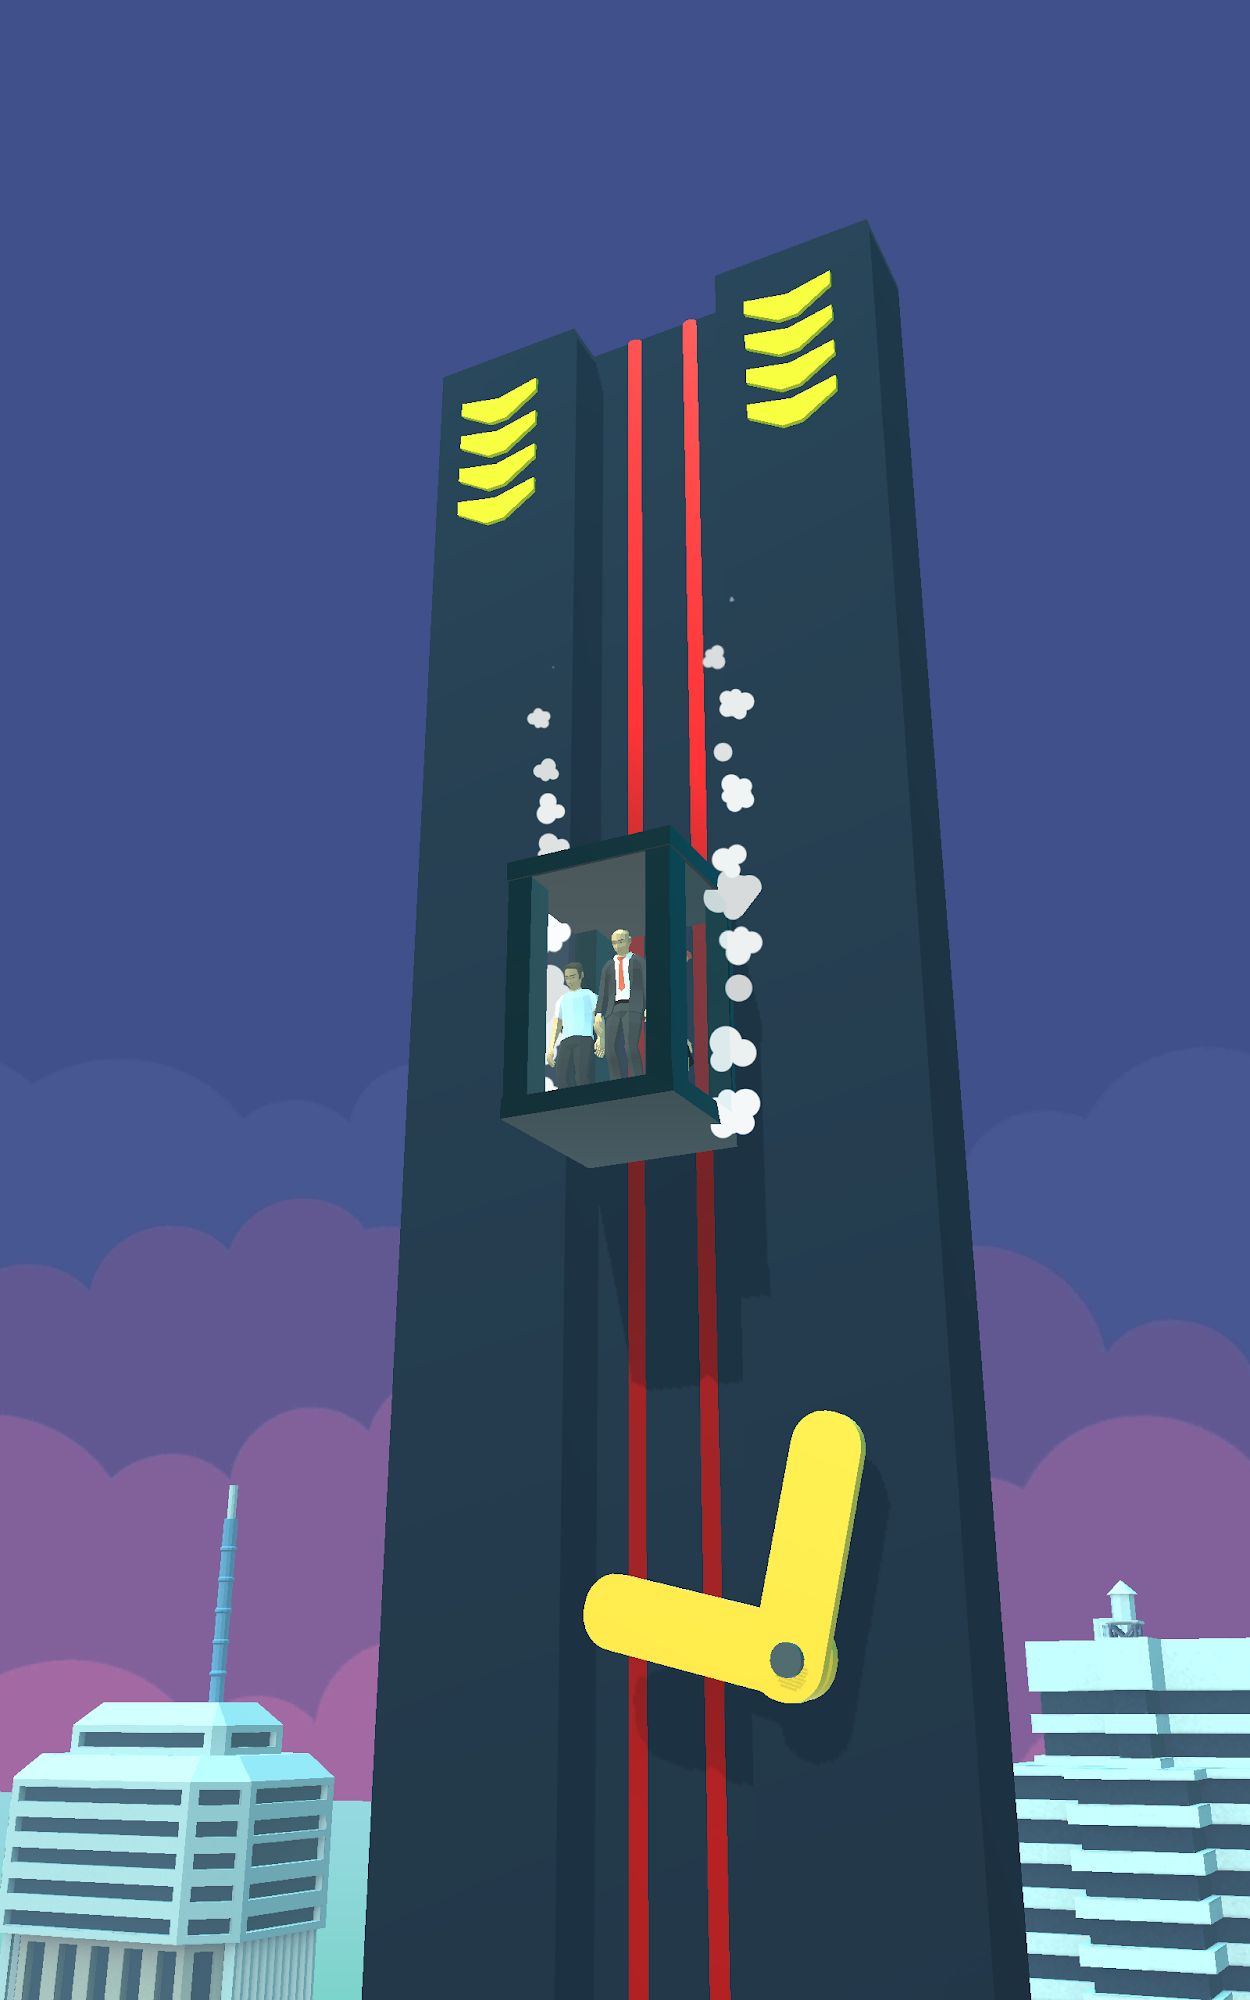 Elevator Fall - Lift Rescue Simulator 3D for Android